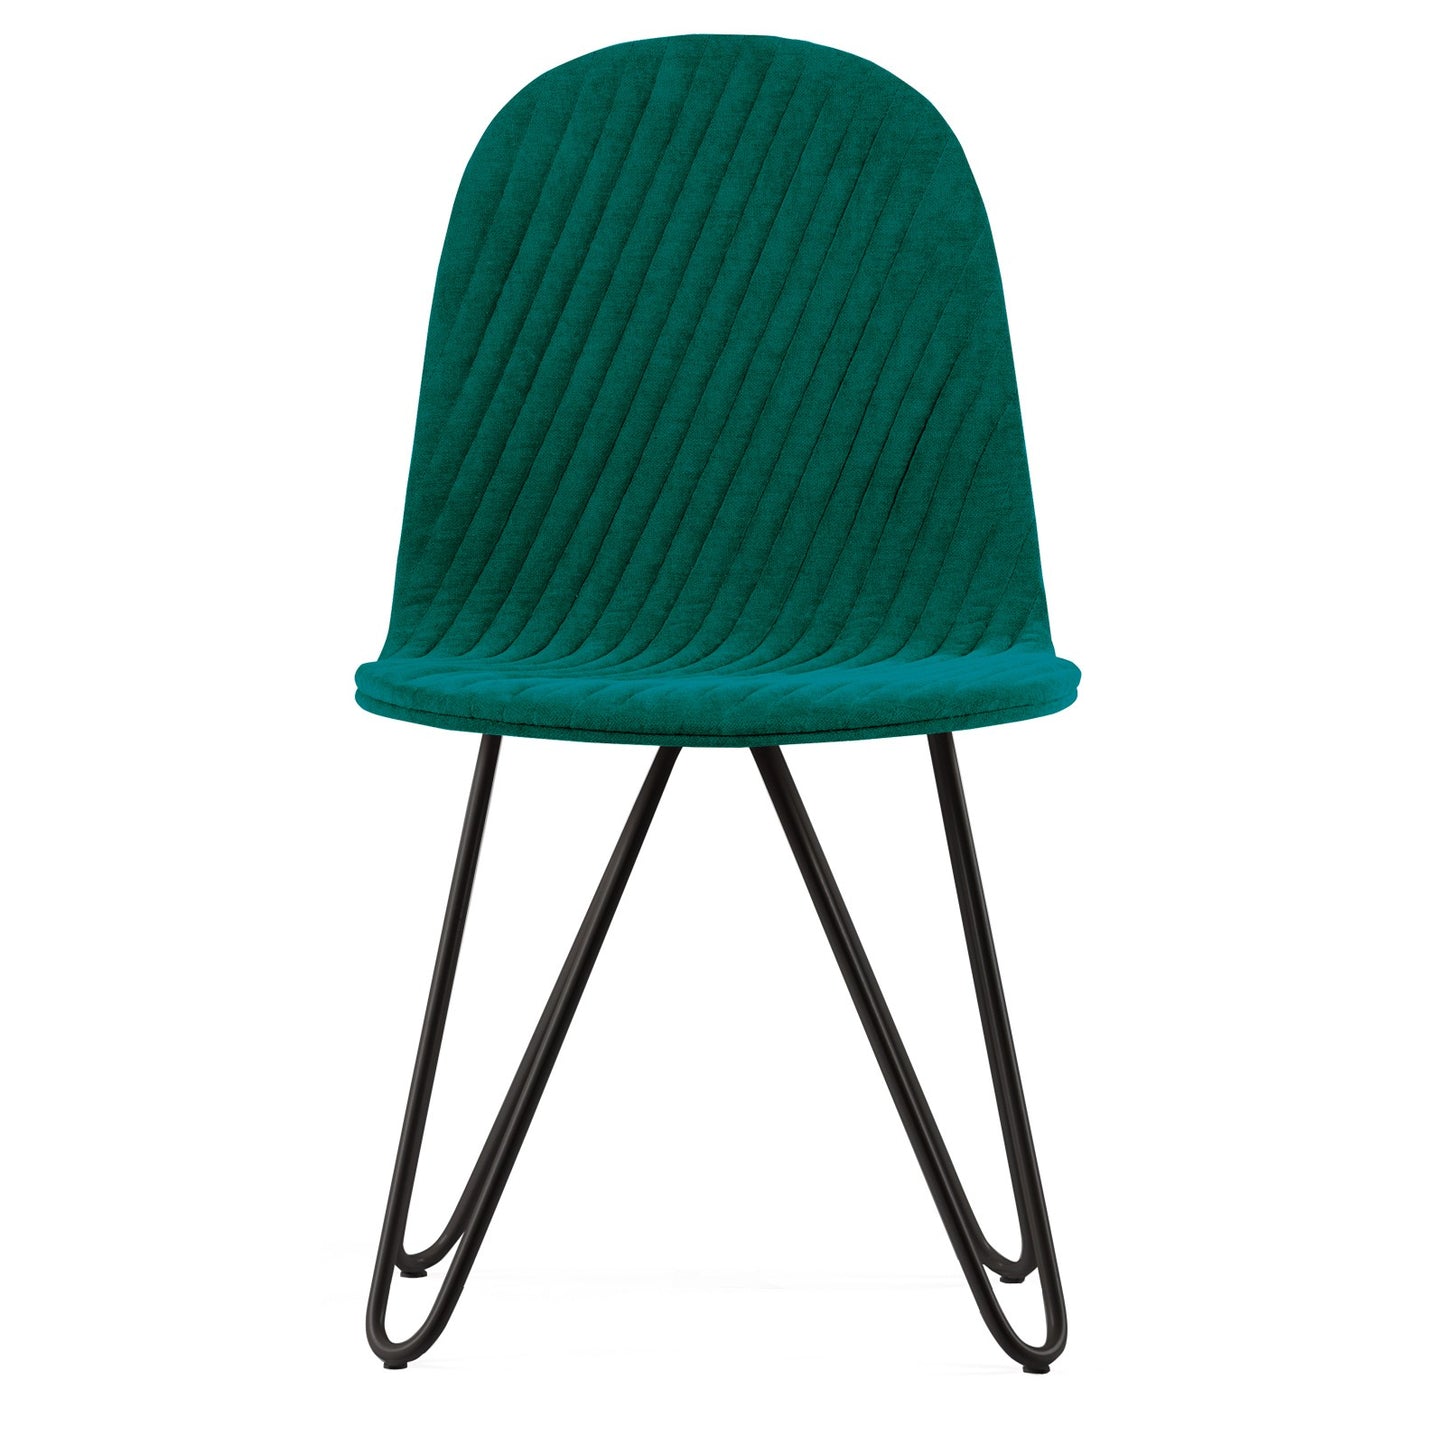 Chair Mannequin 03 - Turquoise